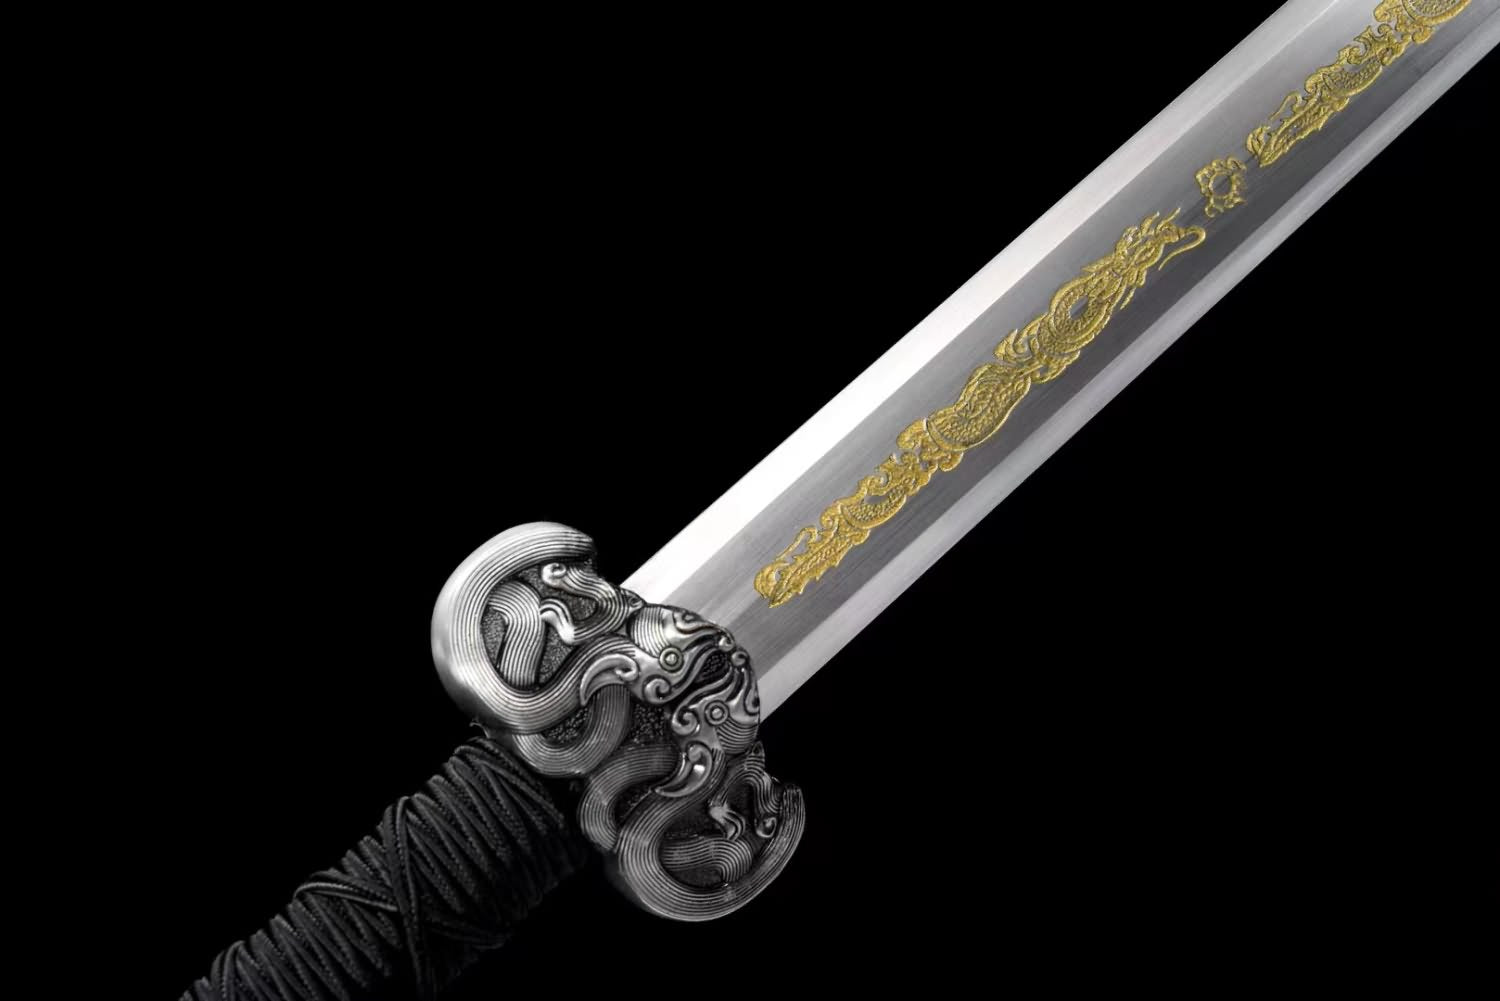 Han jian Sword Forged High Carbon Steel Etched Blade,Alloy Fittings,White Leather